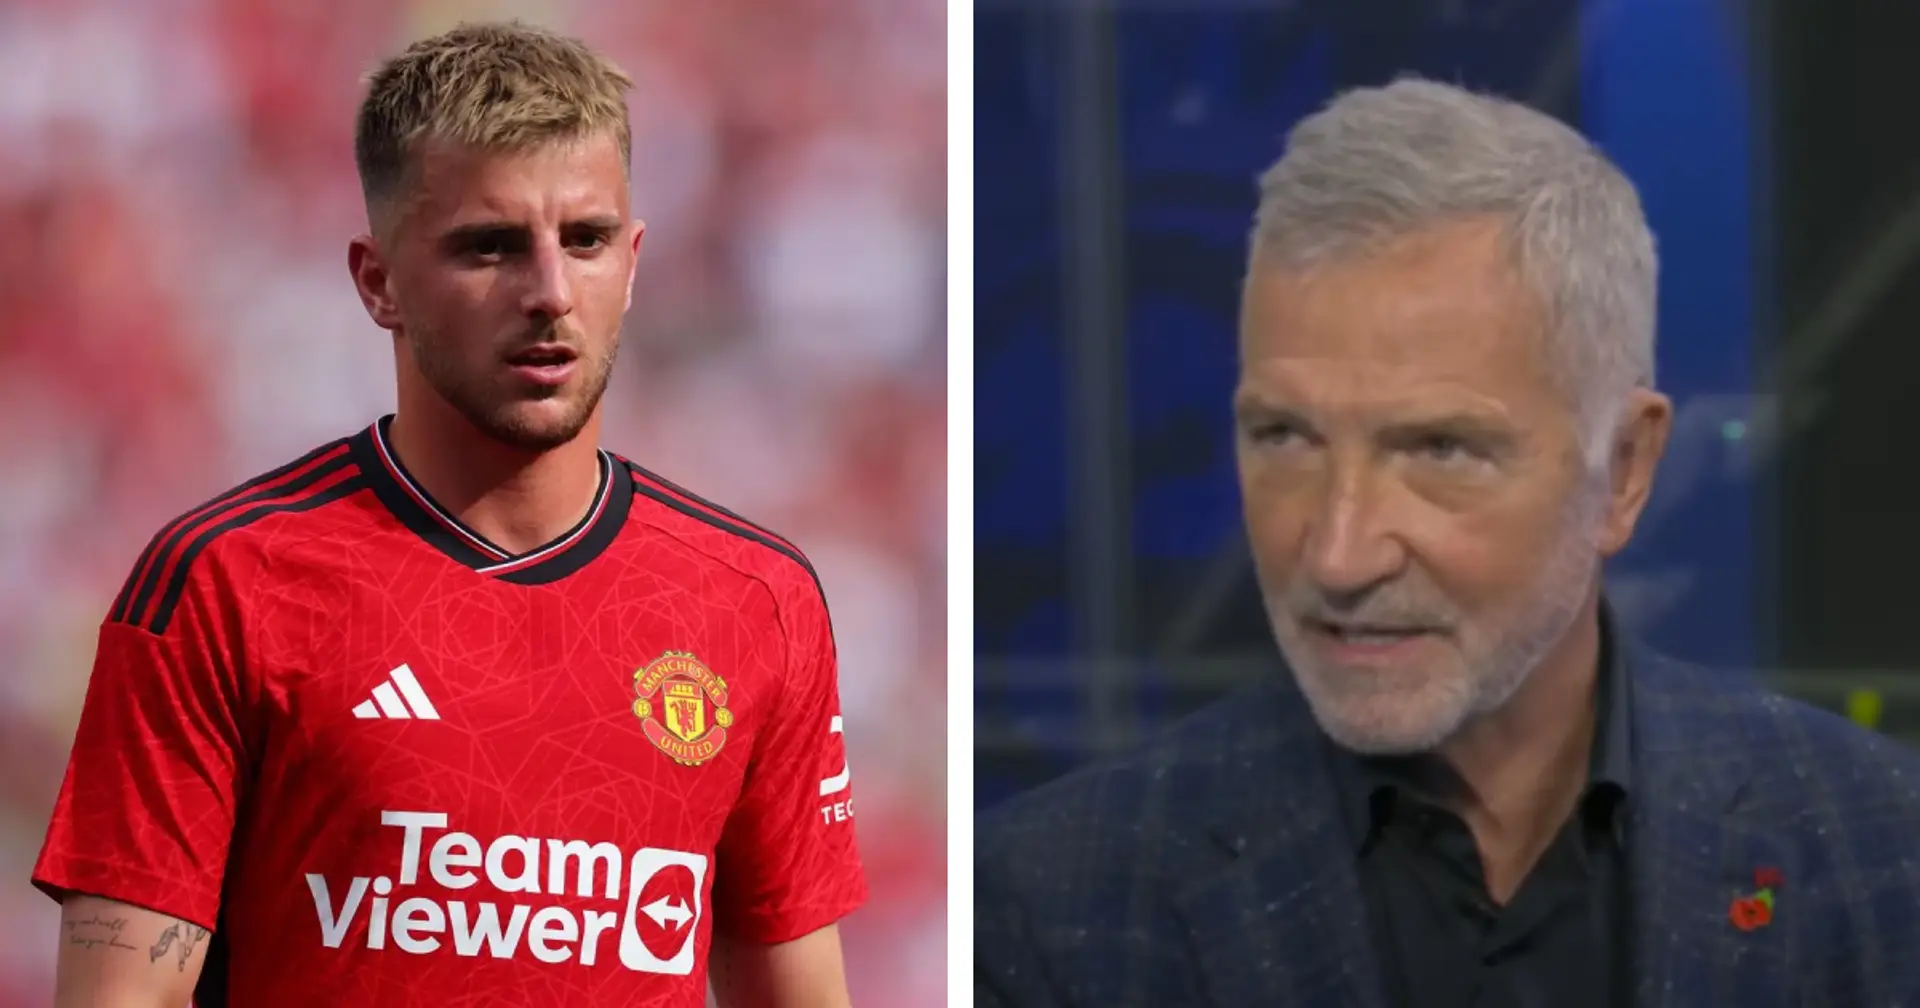 'He's only going to get better': Graeme Souness adamant Chelsea made a 'mistake' by selling Mason Mount